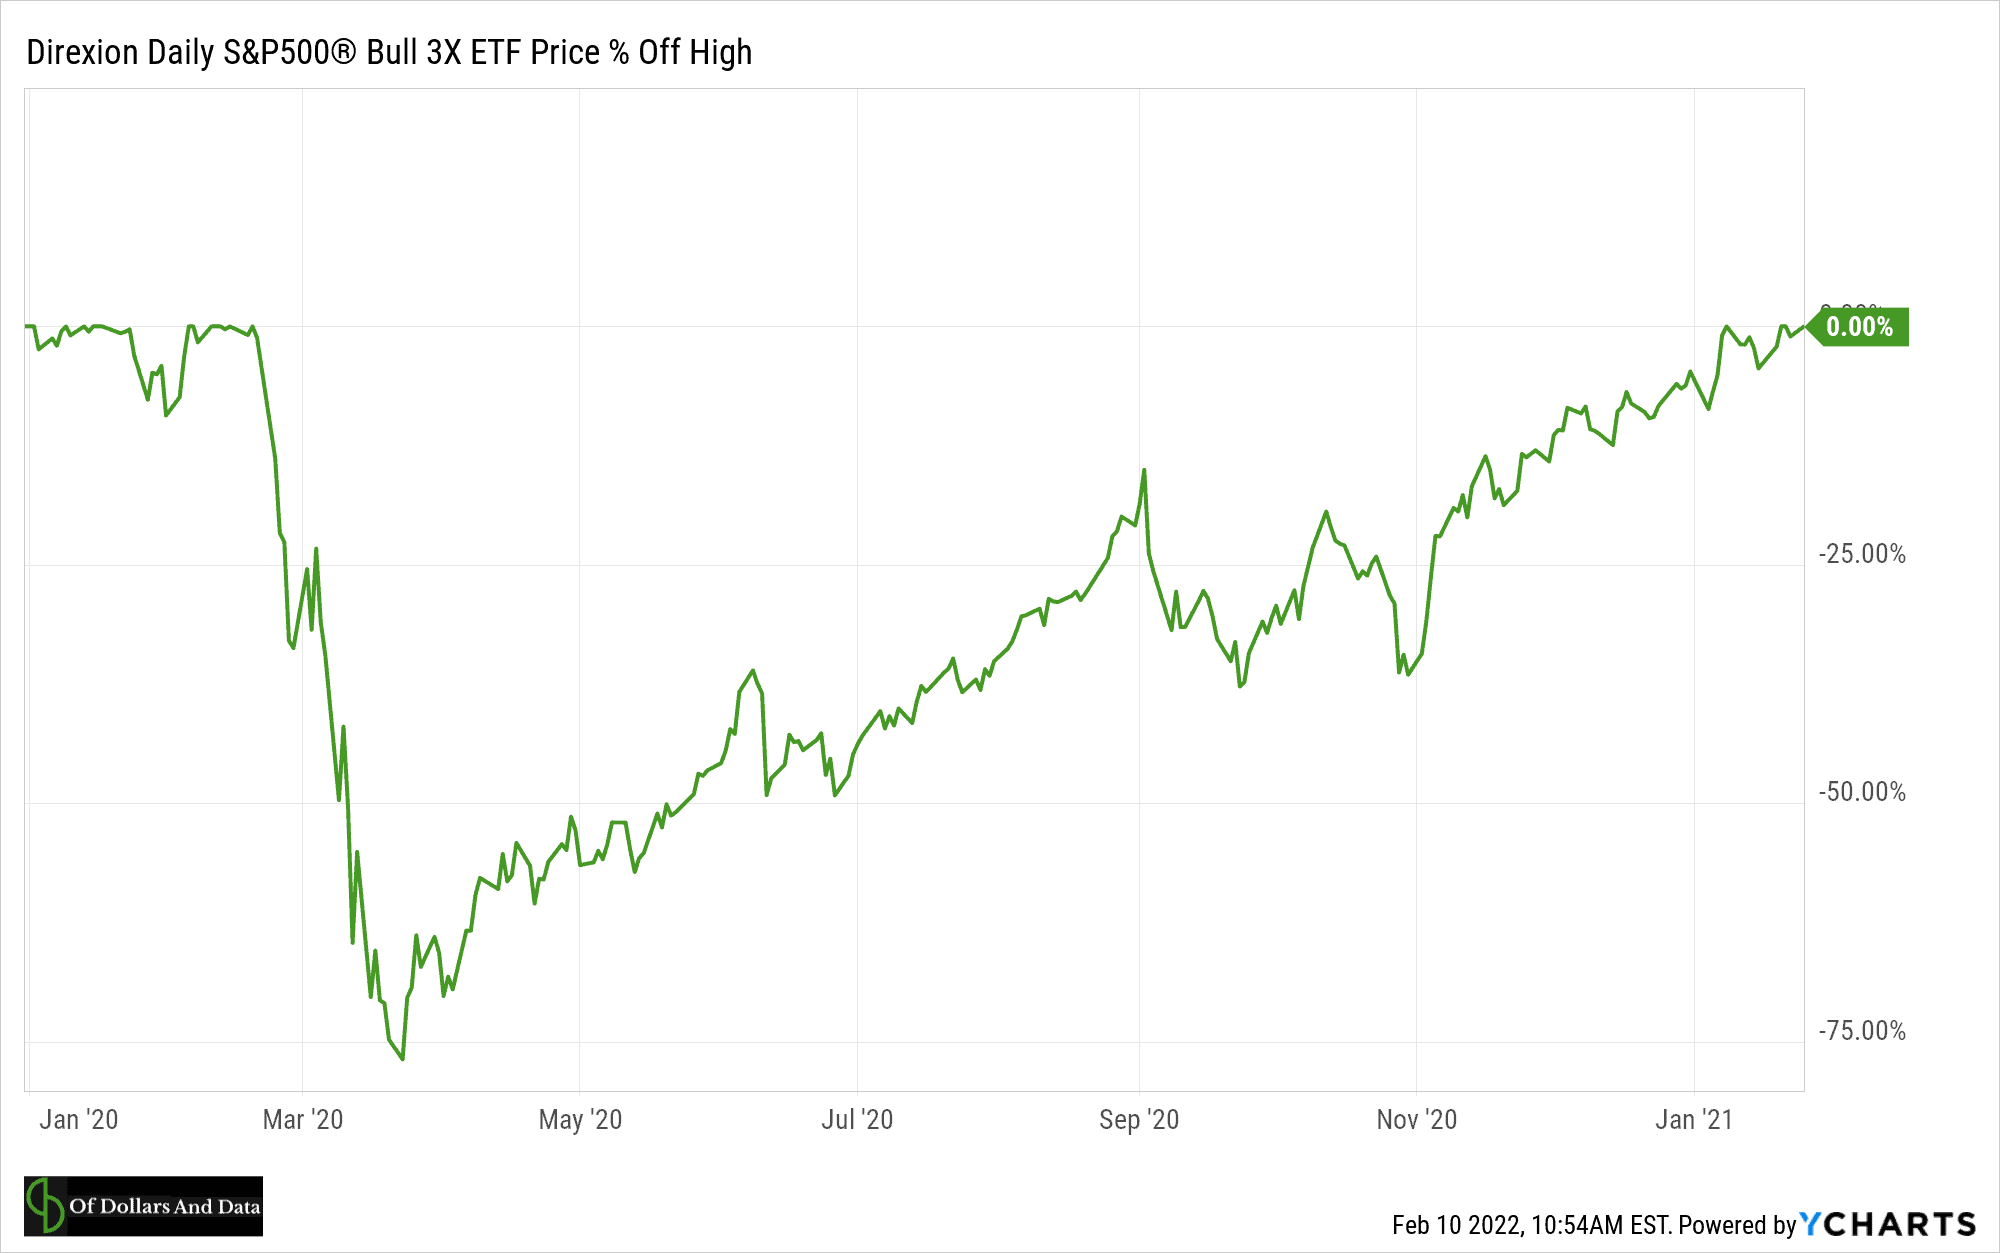 Direxion Daily 3x leverage S&P 500 fund during 2020.